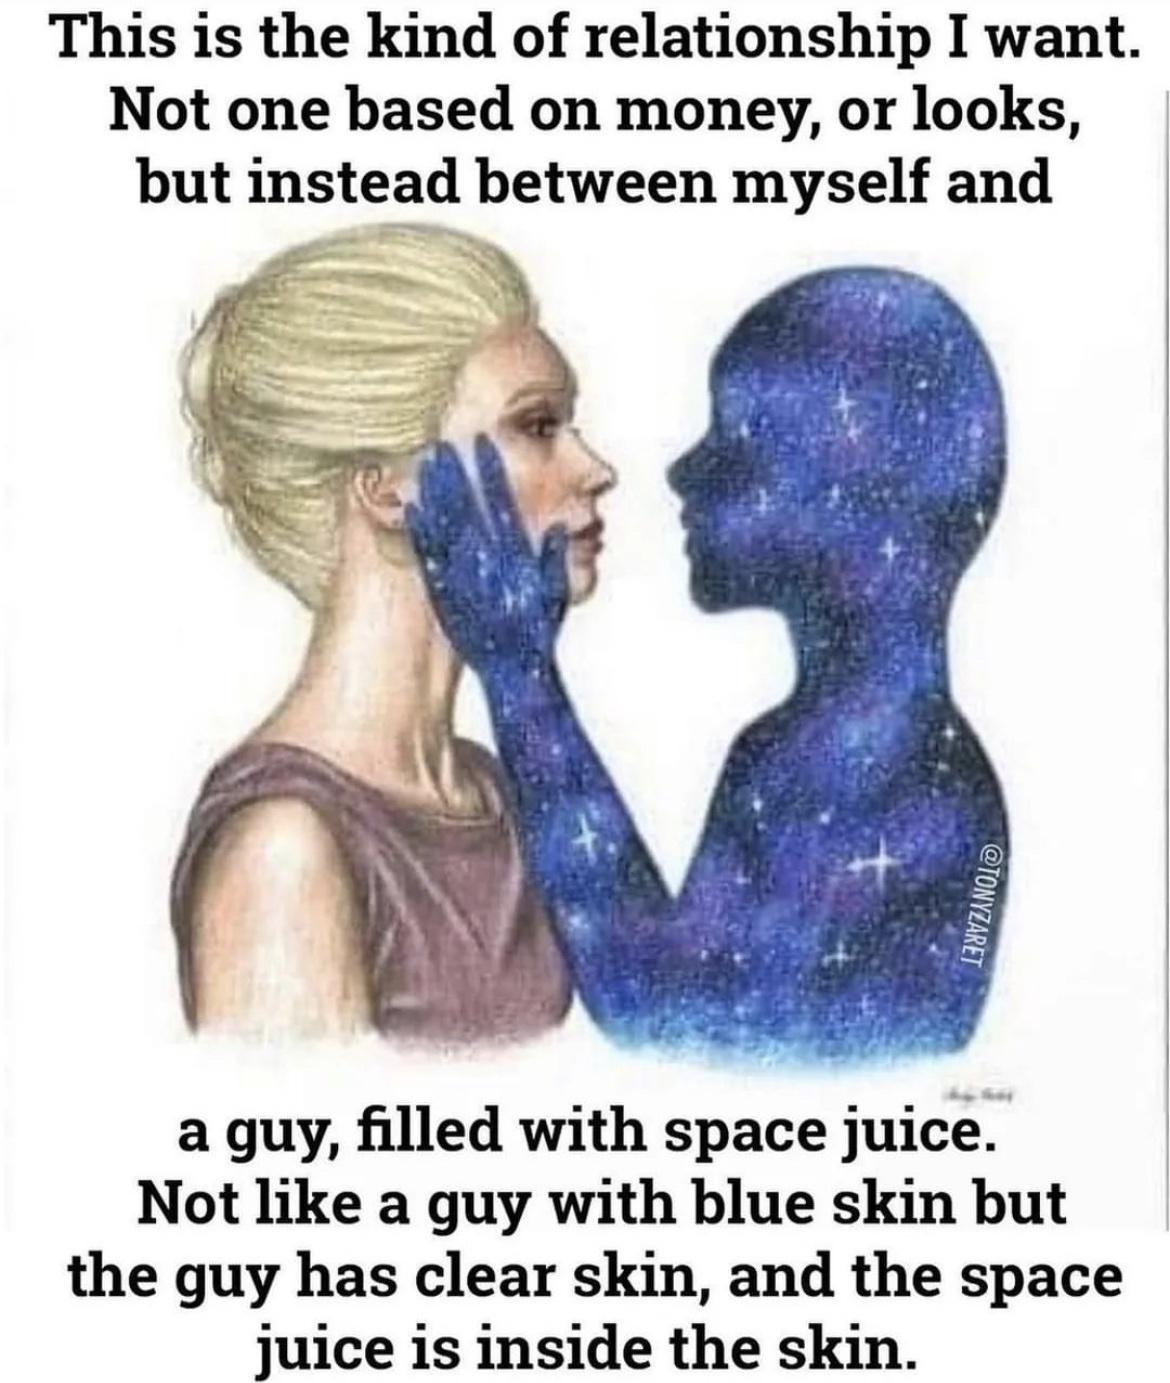 fresh memes - ive got you just control your mind - This is the kind of relationship I want. Not one based on money, or looks, but instead between myself and a guy, filled with space juice. Not a guy with blue skin but the guy has clear skin, and the space